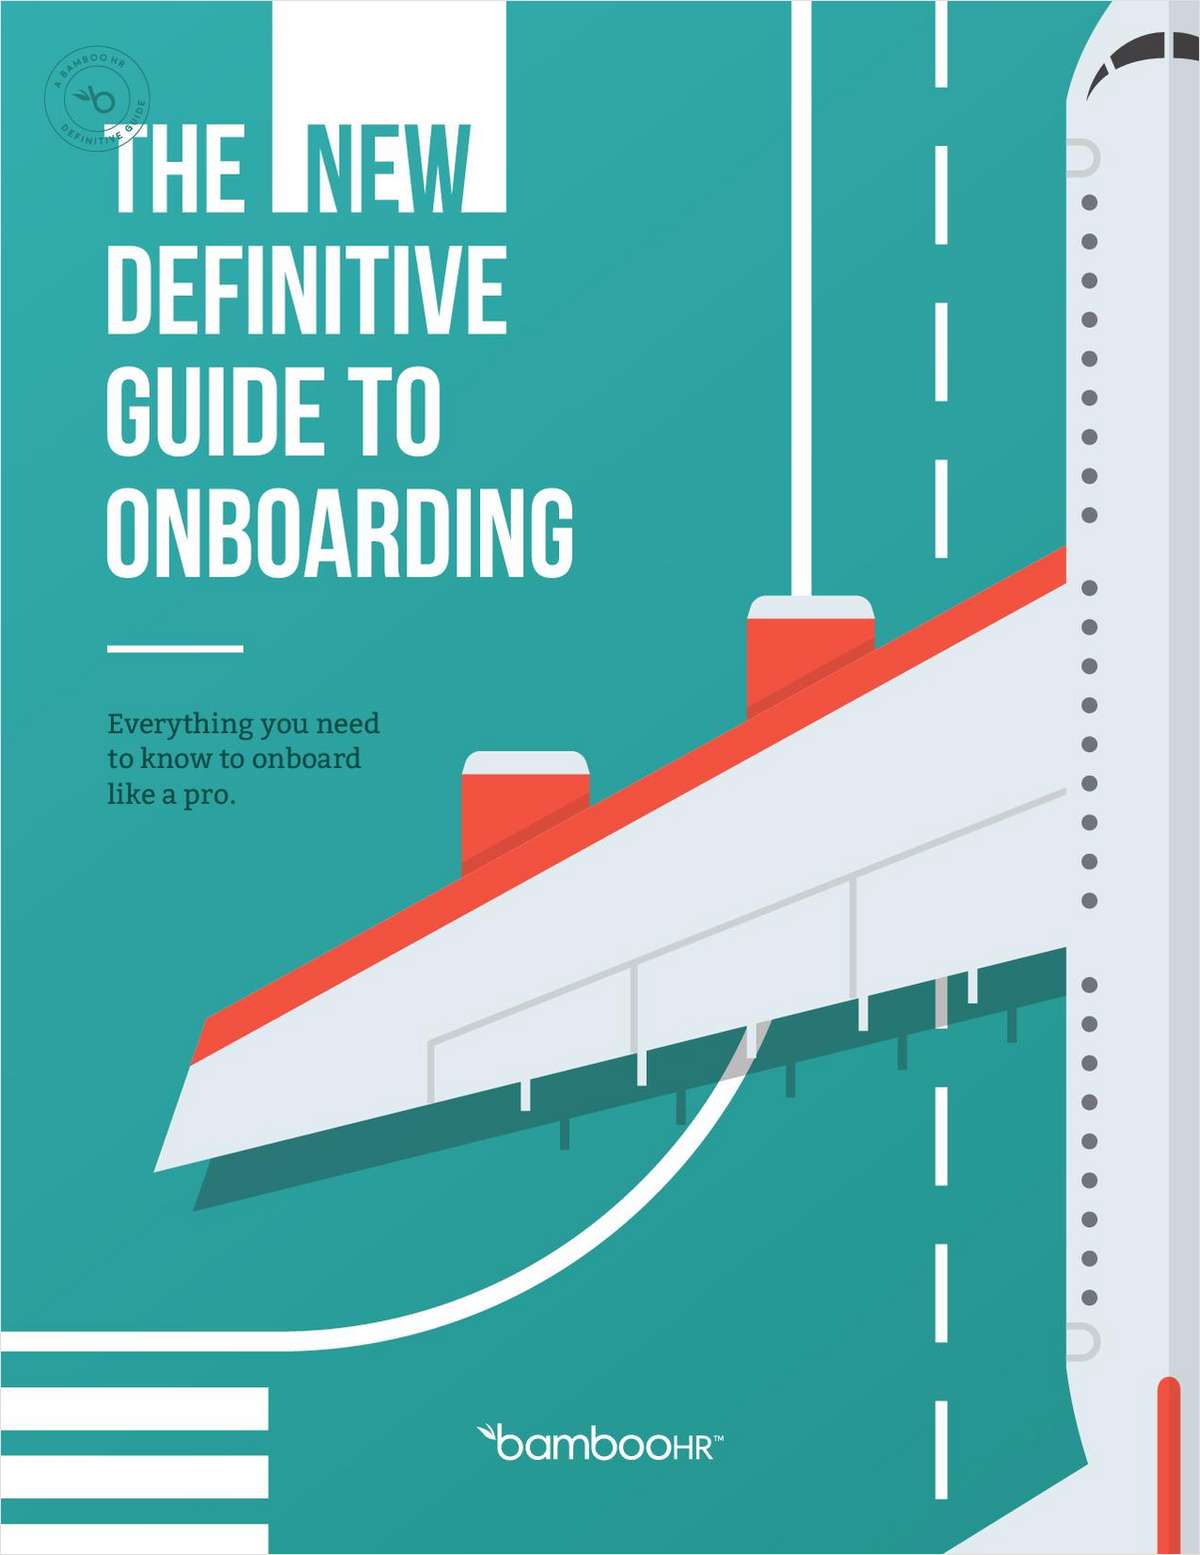 The New Definitive Guide to Onboarding